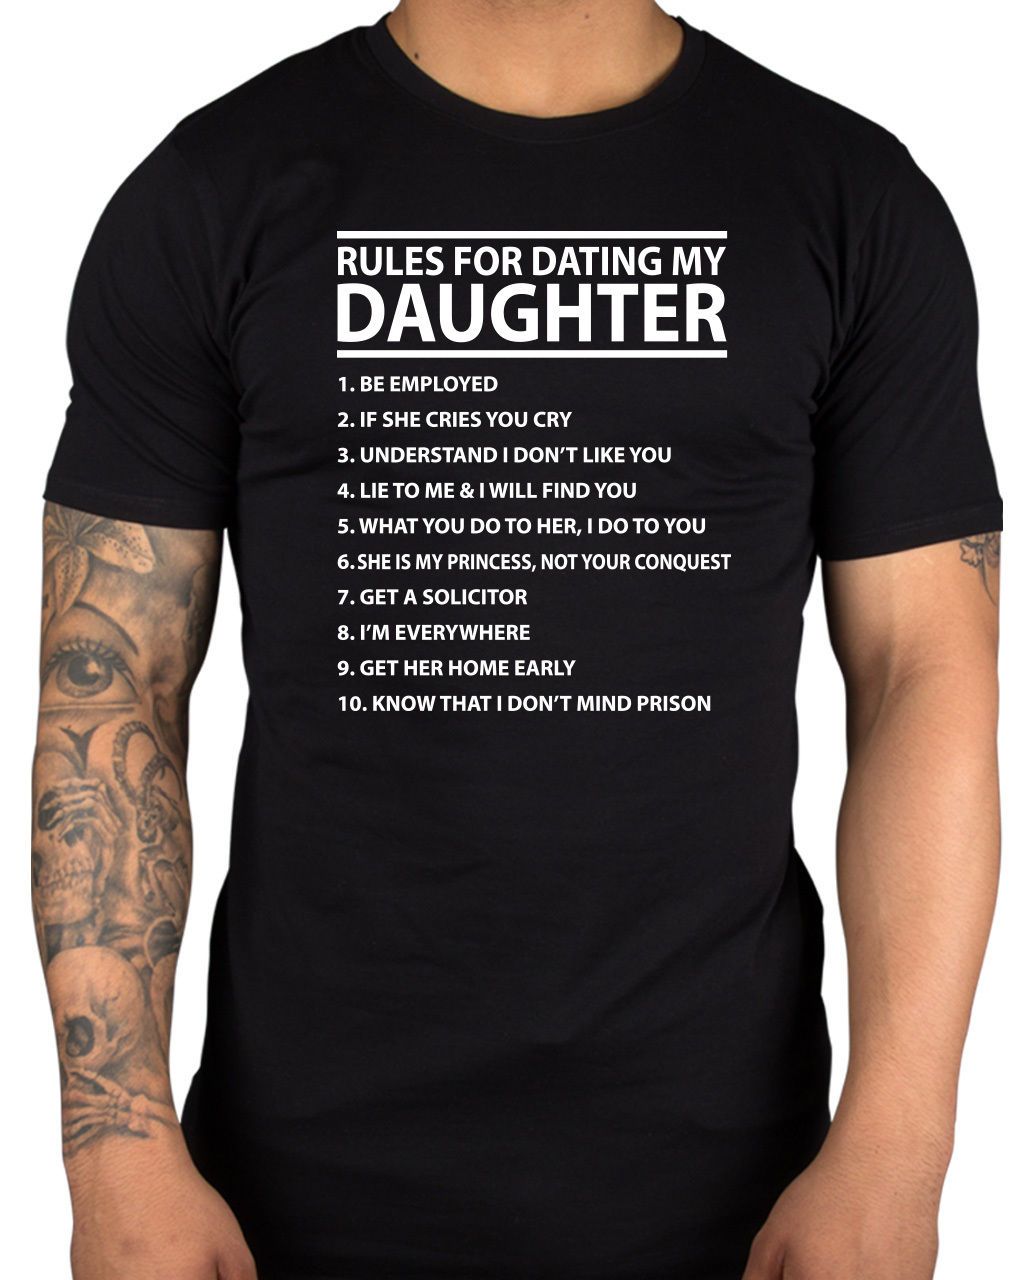 Dating daughter t shirts